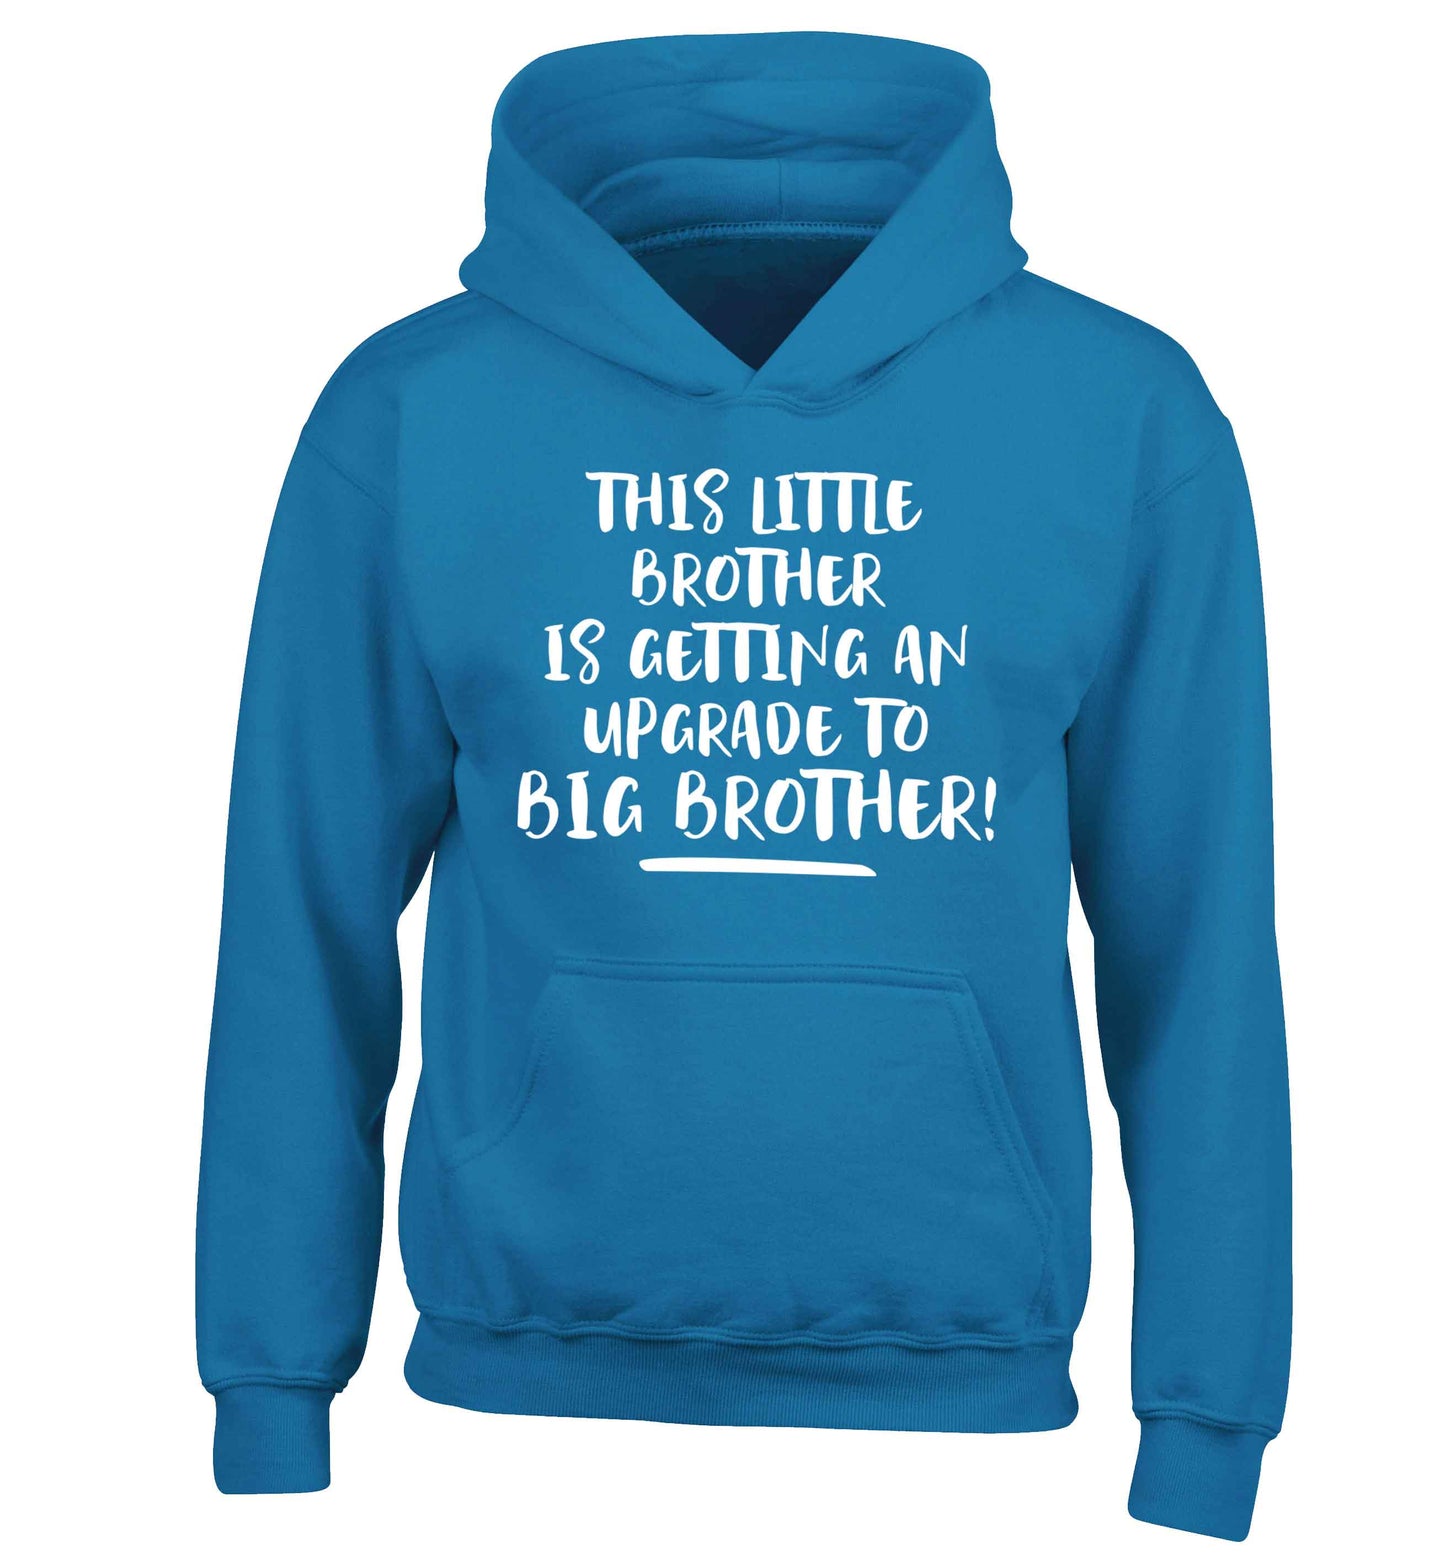 This little brother is getting an upgrade to big brother! children's blue hoodie 12-13 Years